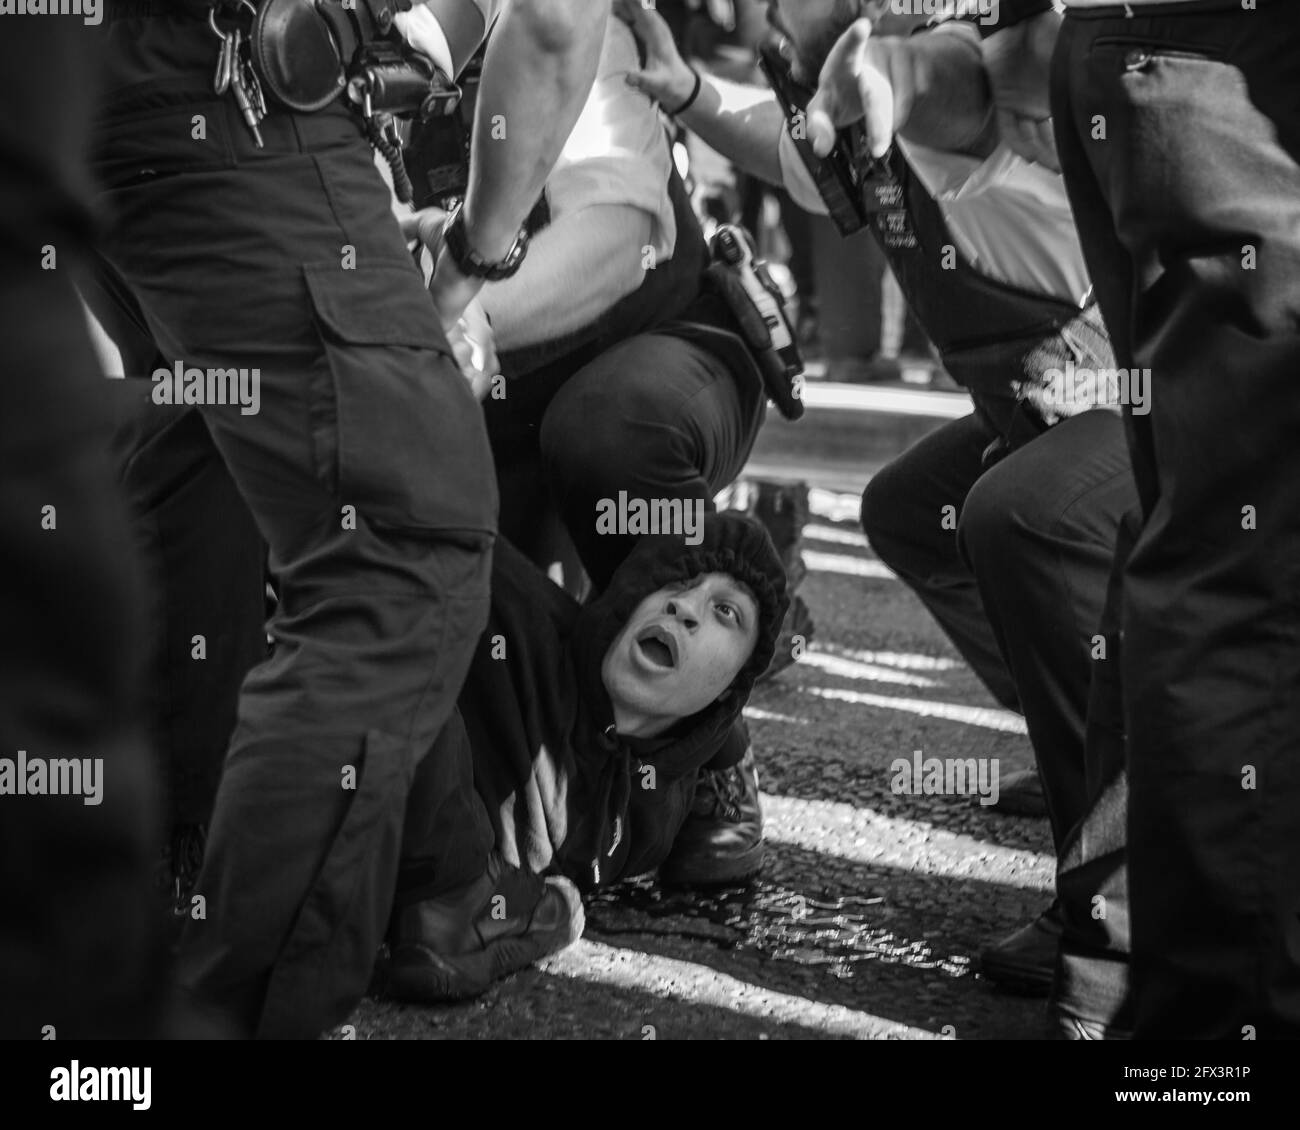 A protester is arrested by police in London during the Black Lives protests during lockdown in 2020 Stock Photo